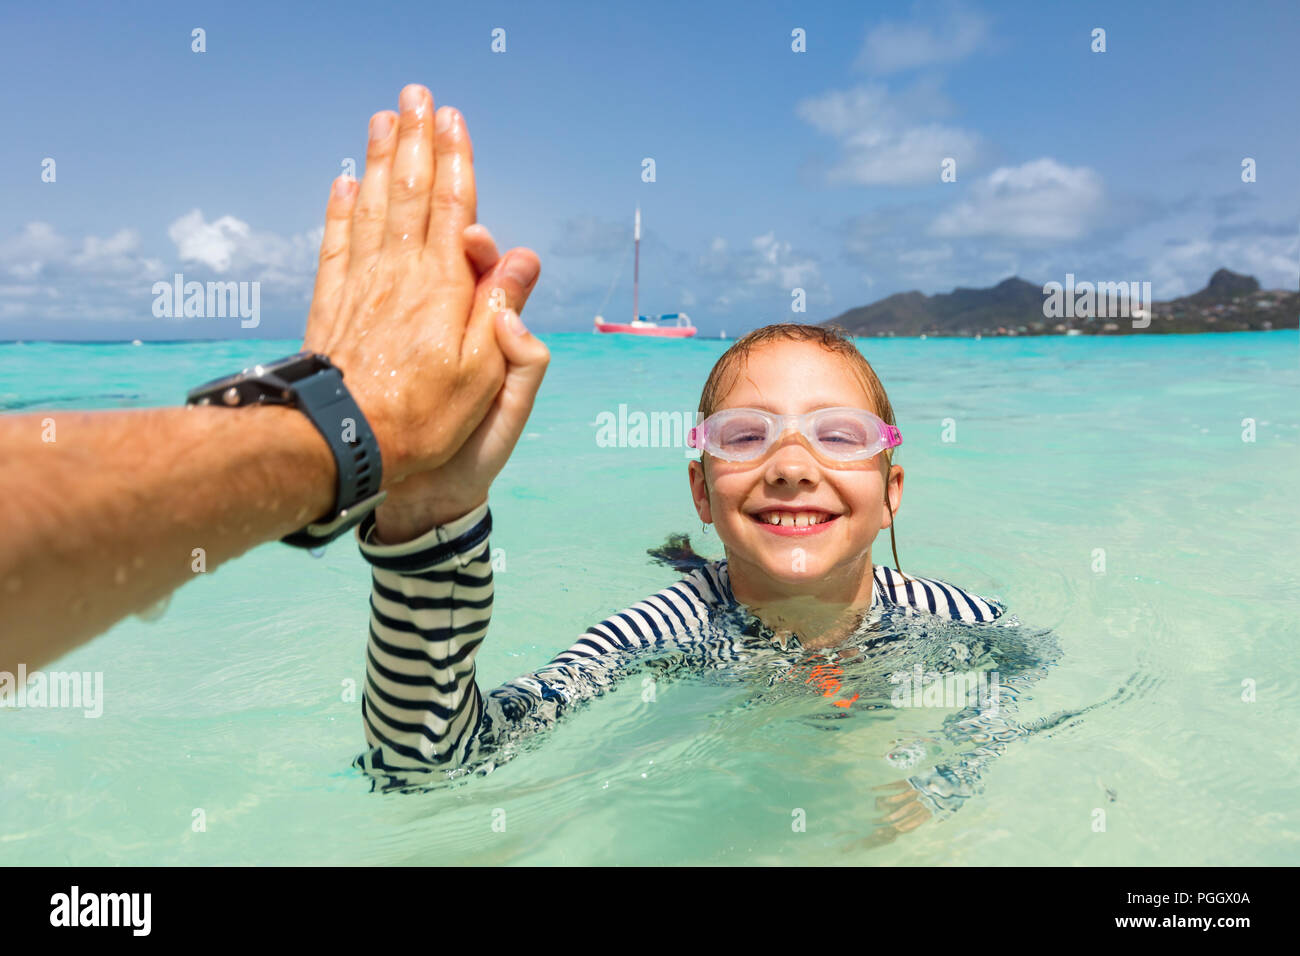 Split underwater photo of cute girl having fun with her father in tropical ocean Stock Photo